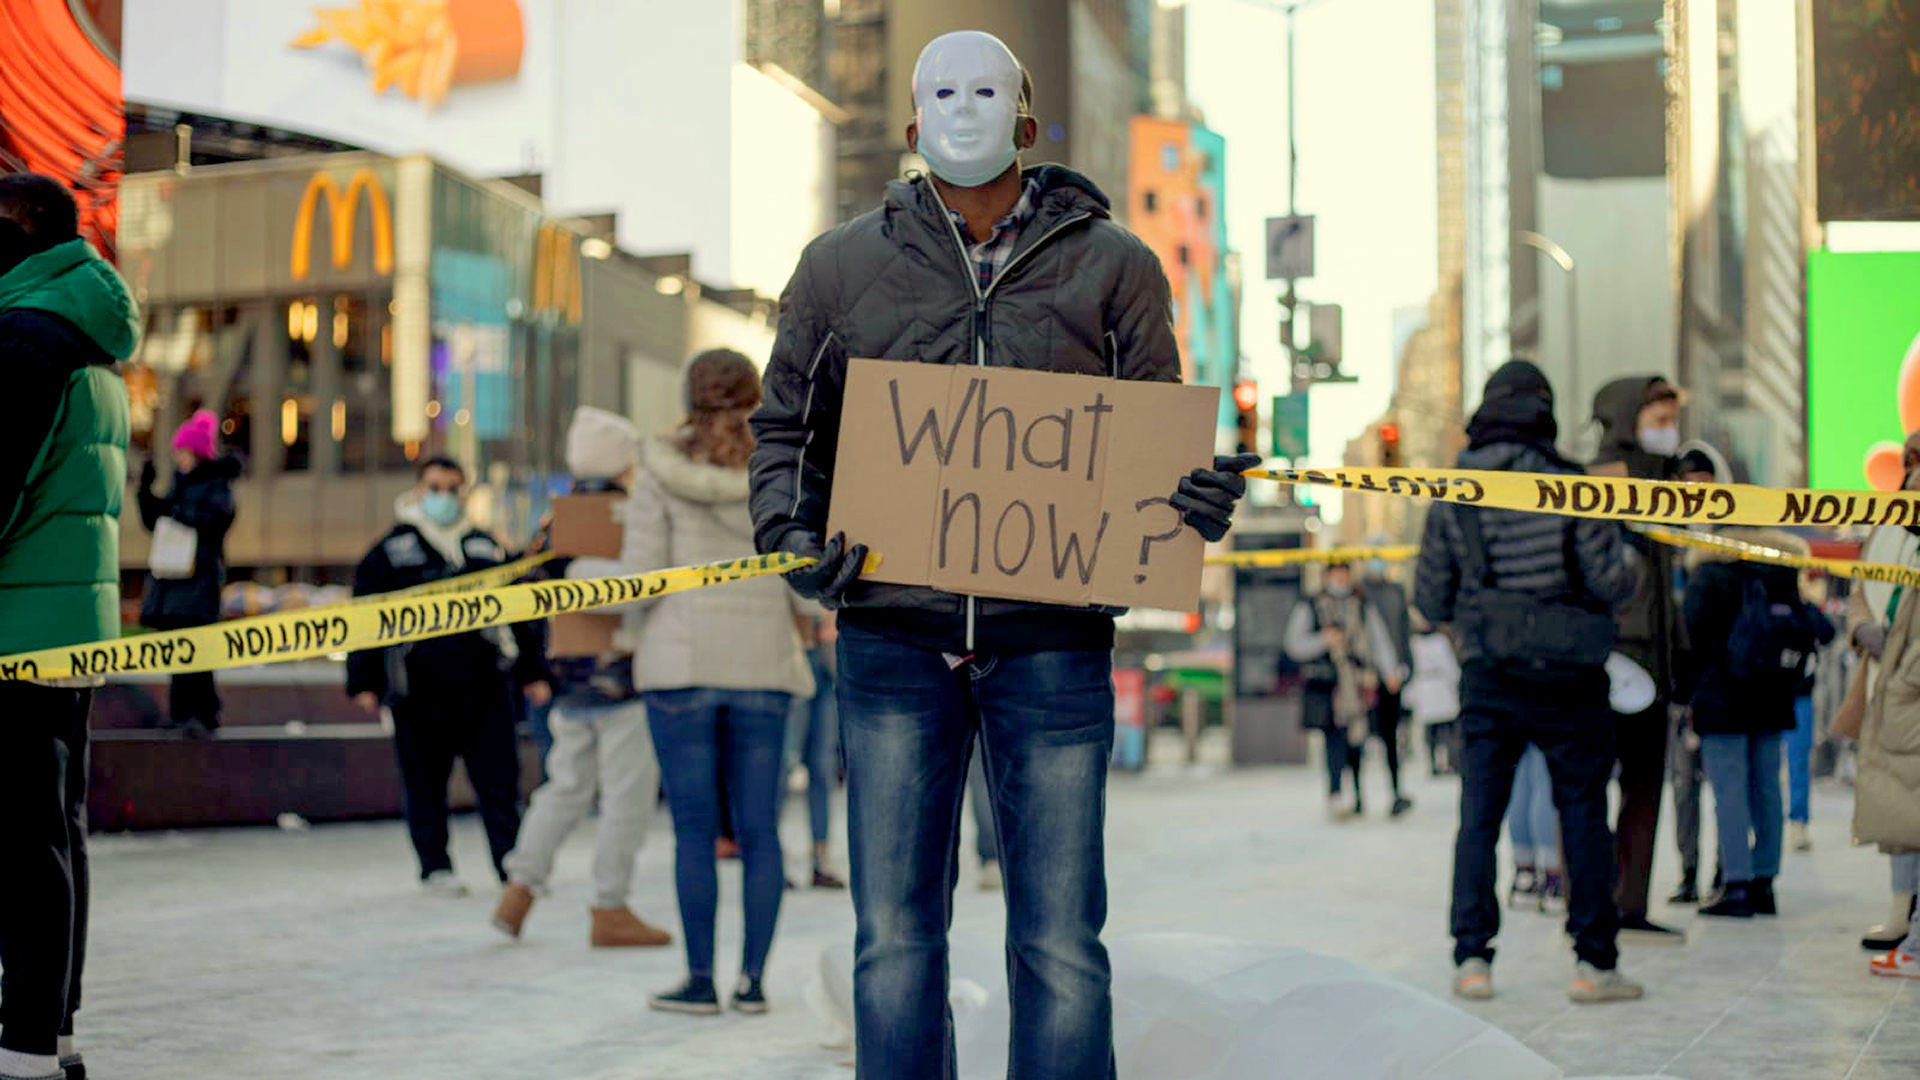 Wearing white masks, the team engaged in impactful evangelism in Times Square